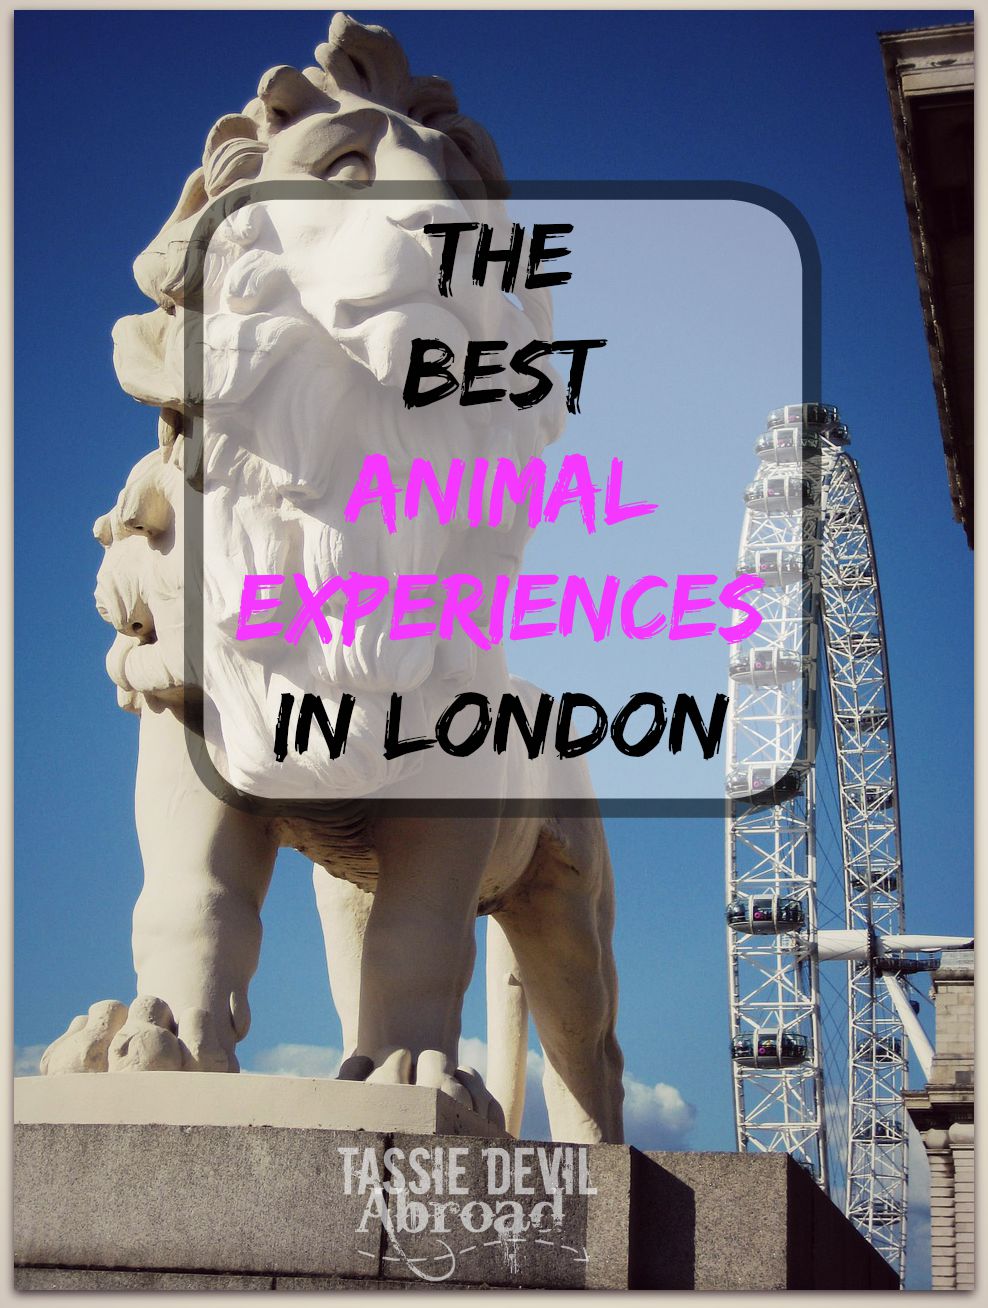 The Best Animal Experiences in London!